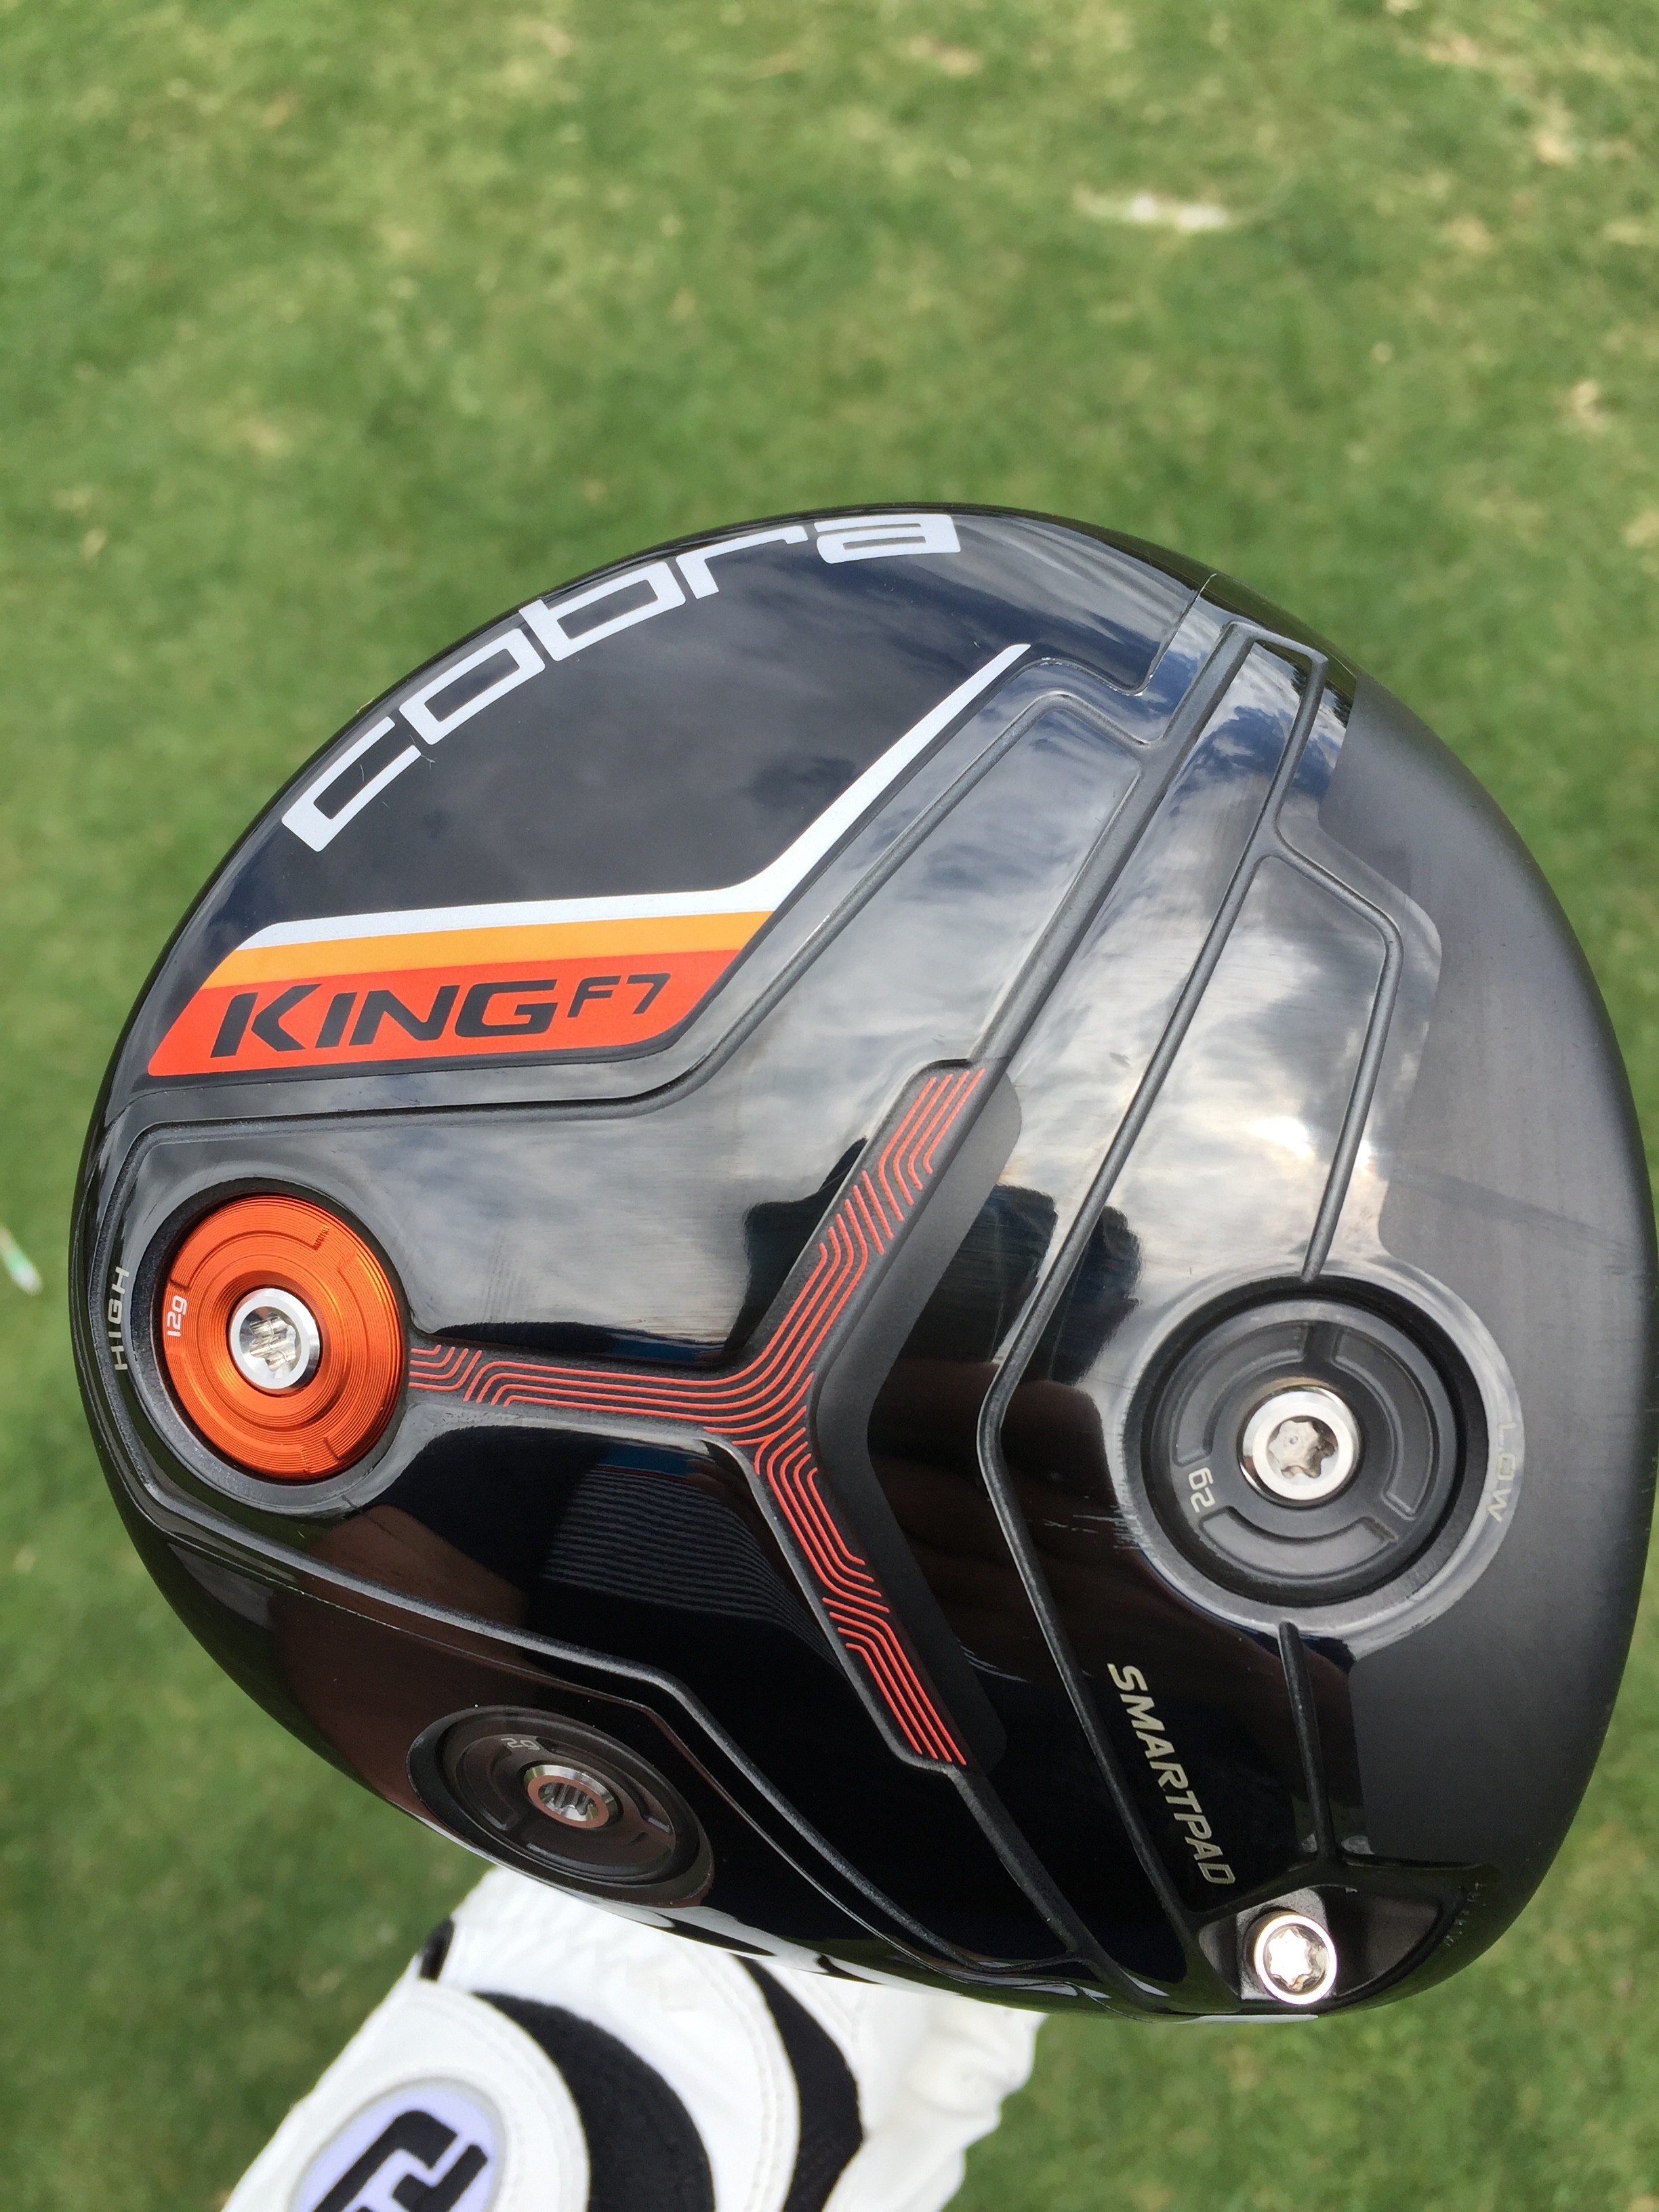 Cobra King F7 Driver - Range Review | Busted Wallet